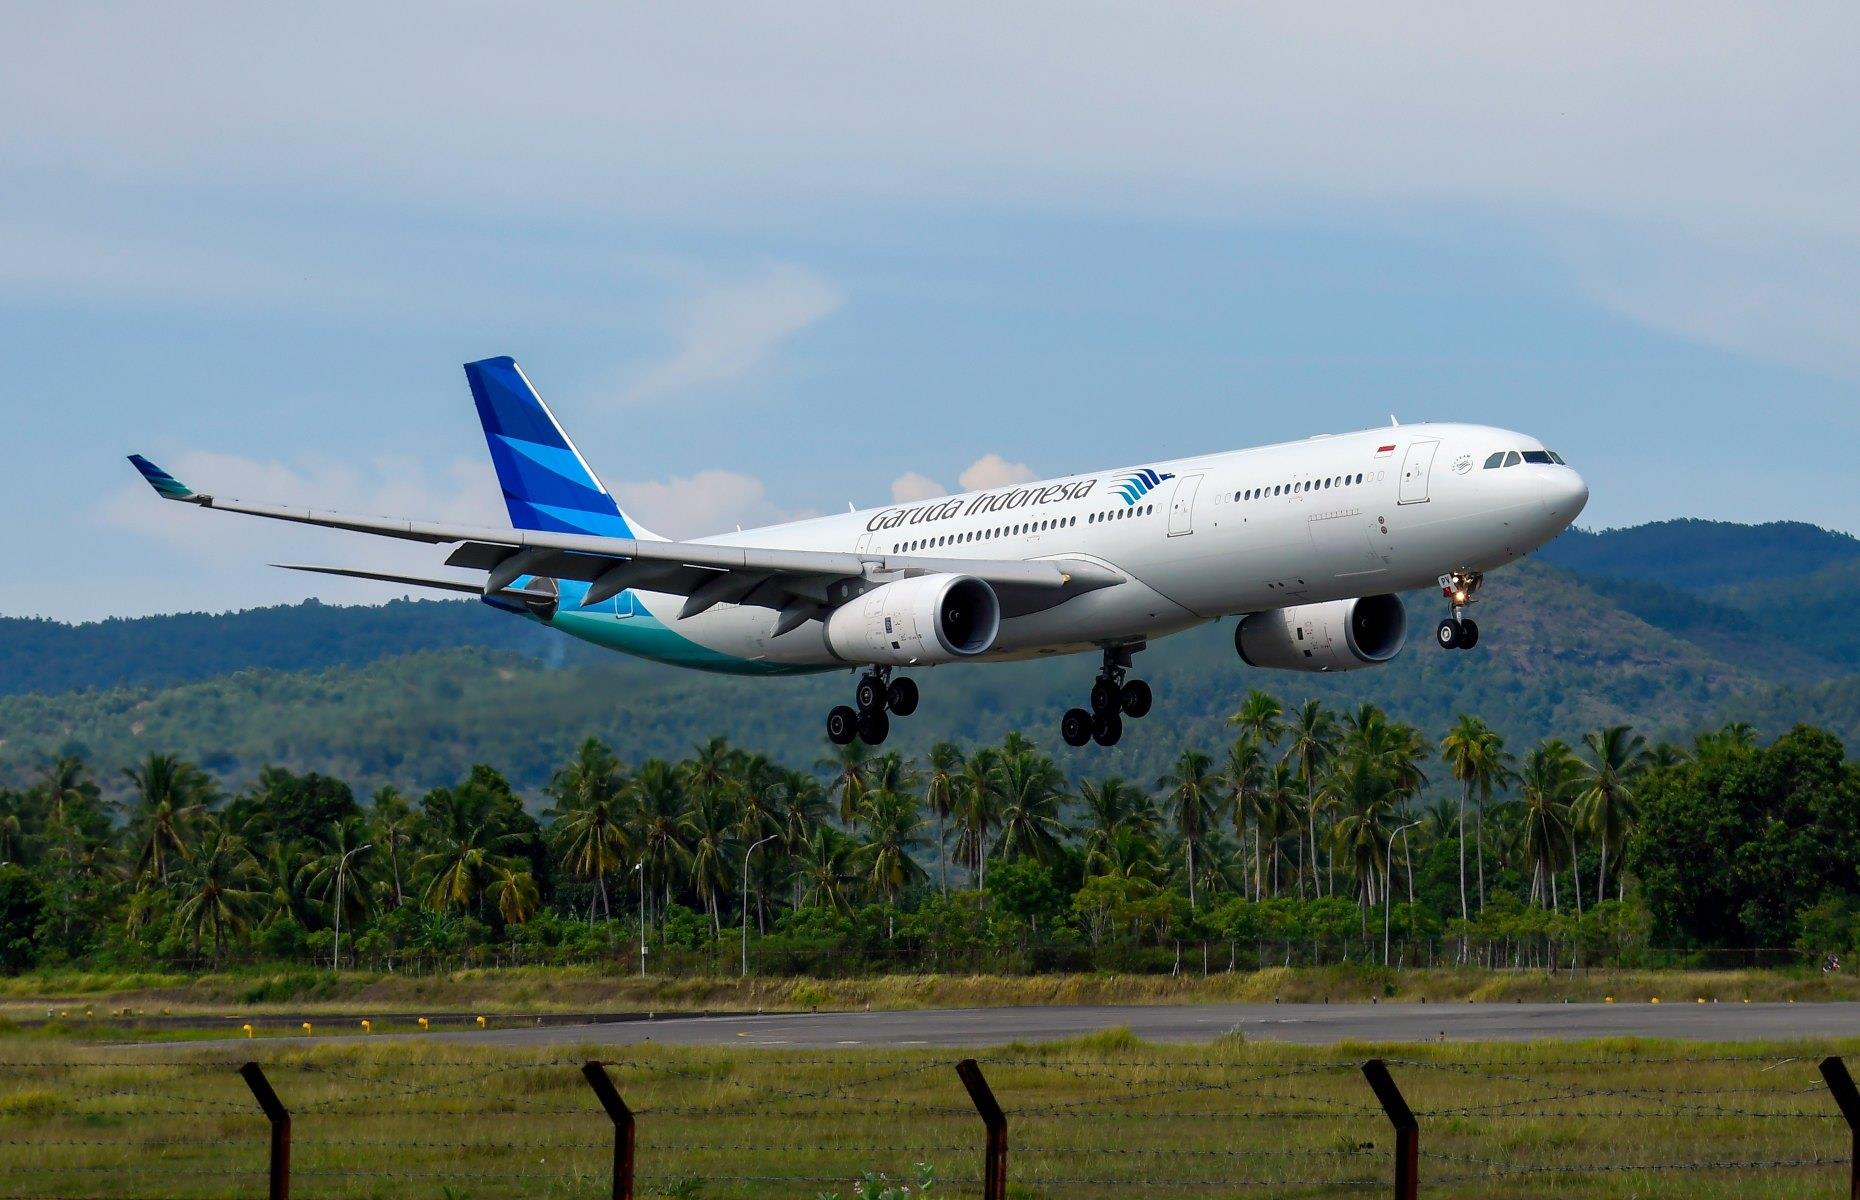 Running away with the Best Cabin Crew title, the national carrier for Indonesia is back on form in 2023 after winning the award for five consecutive years from 2014. Garuda Indonesia connects more than 90 destinations worldwide to its home country and the region of Southeast Asia, launching over 600 flights per day.